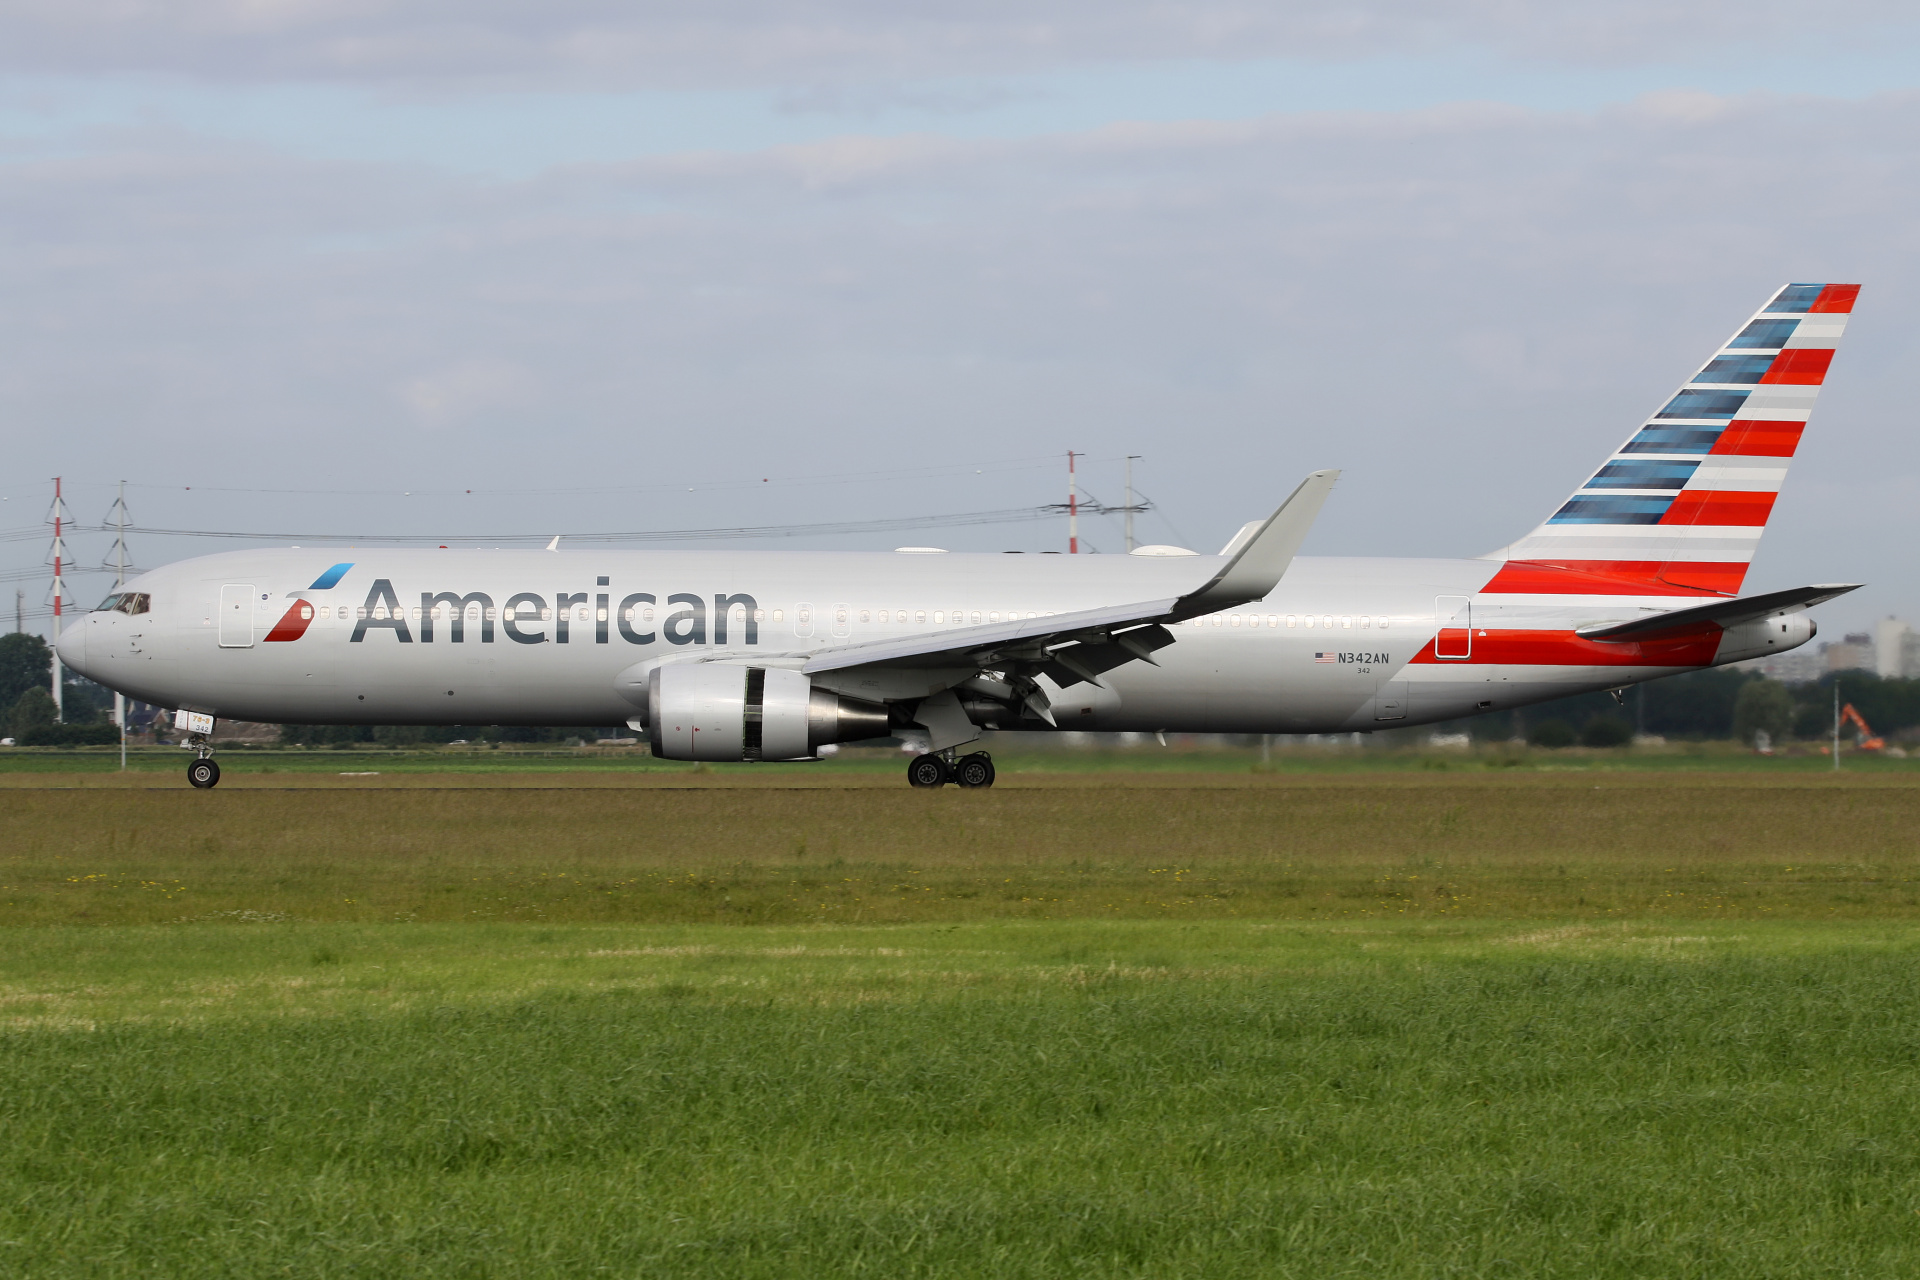 N342AN, American Airlines (Aircraft » Schiphol Spotting » Boeing 767-300)